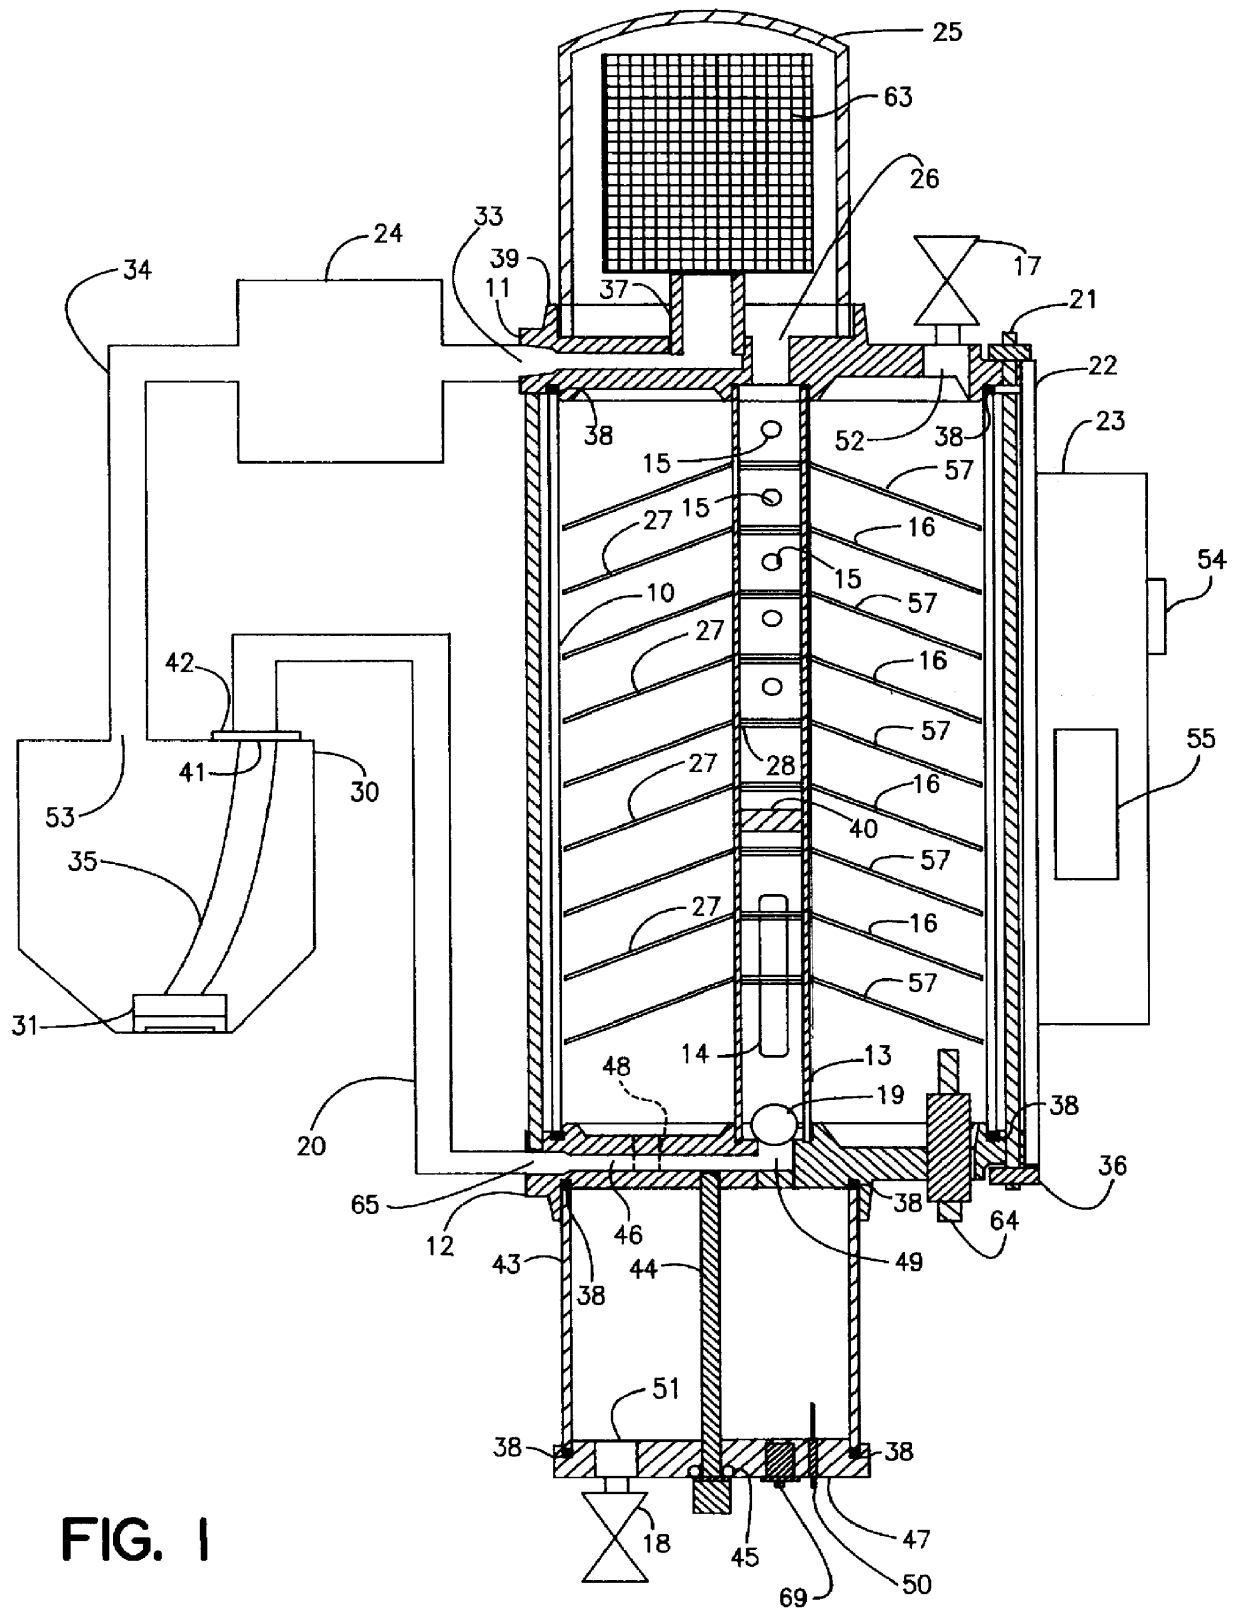 Apparatus for de-watering and purifying fuel oils and other liquids